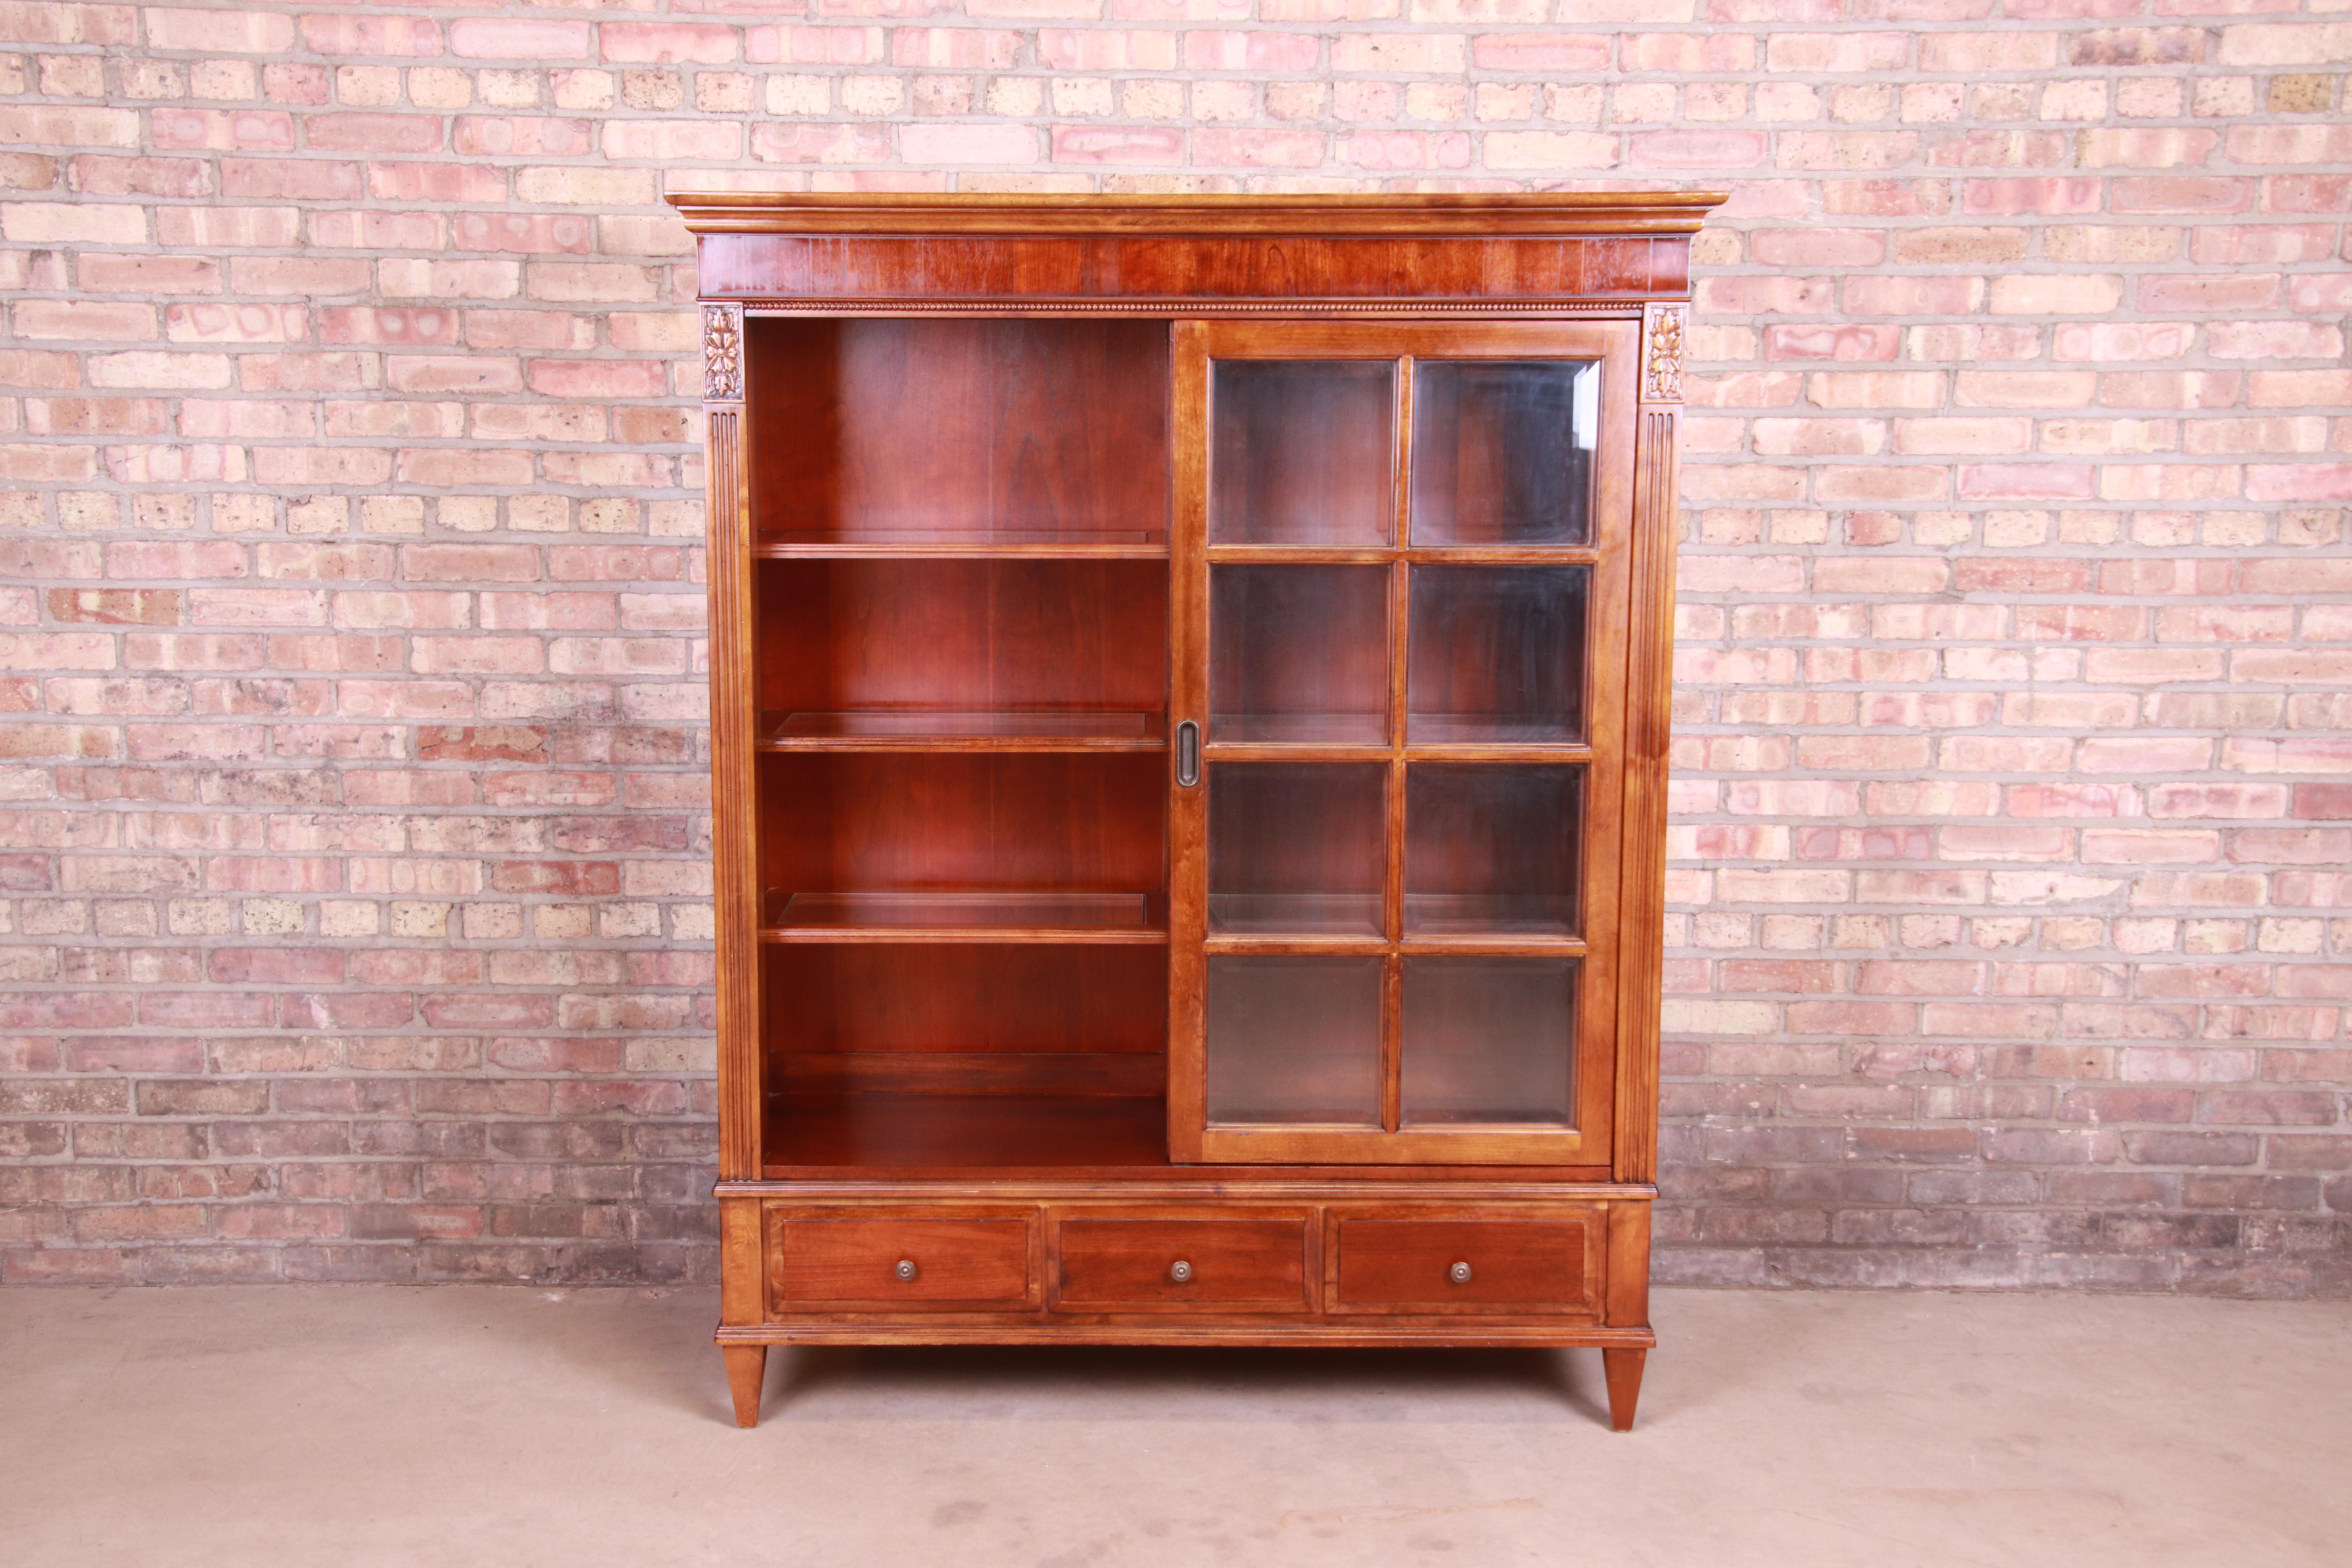 Ethan Allen French Regency Cherry Wood Lighted Bookcase or Display Cabinet 2